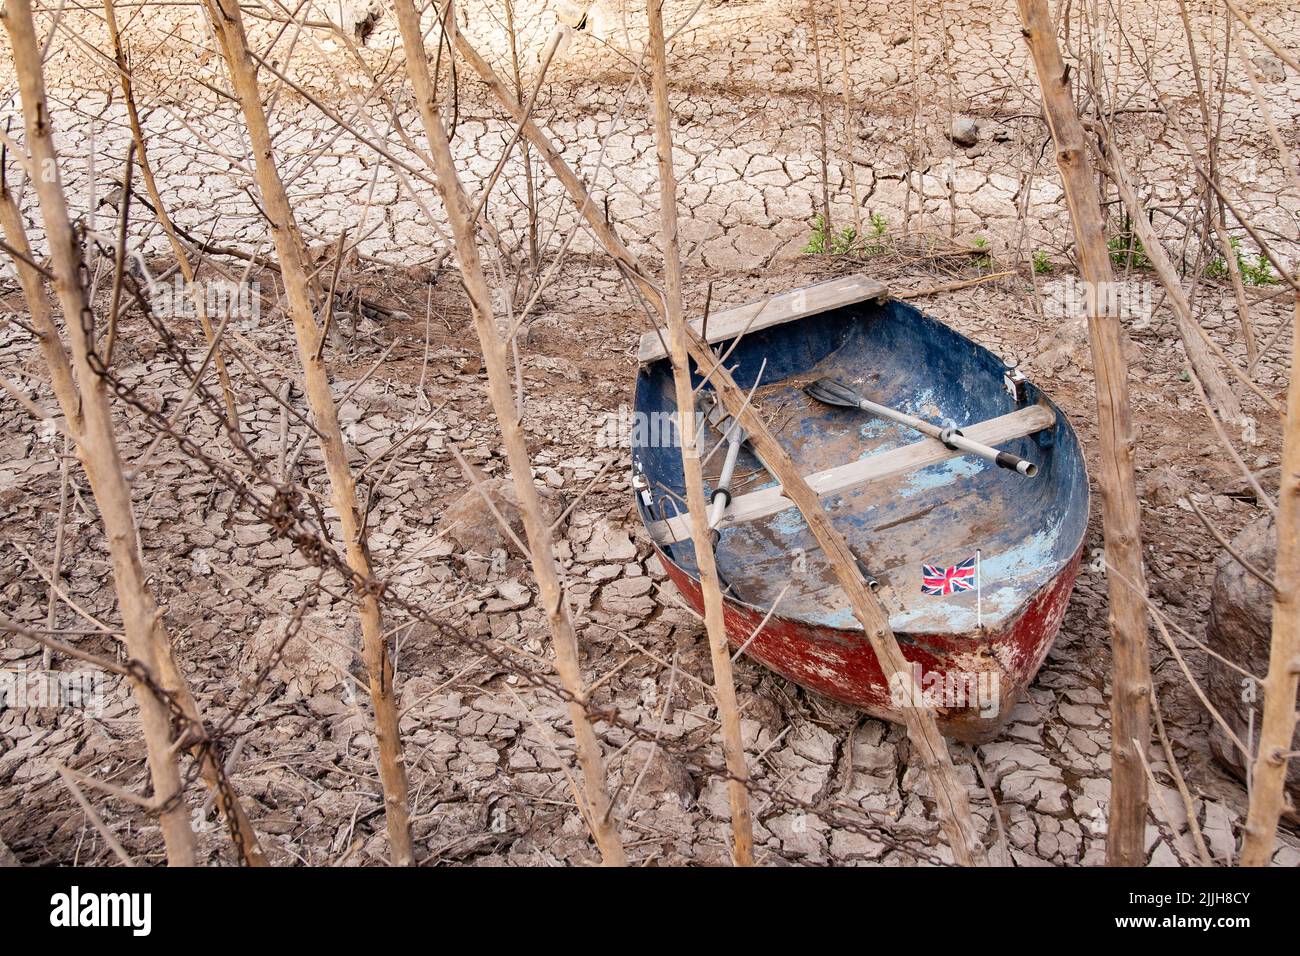 Boat in empty, dry reservoir, lake, cracked earth. Global warming, climate crisis, drought... uk Stock Photo